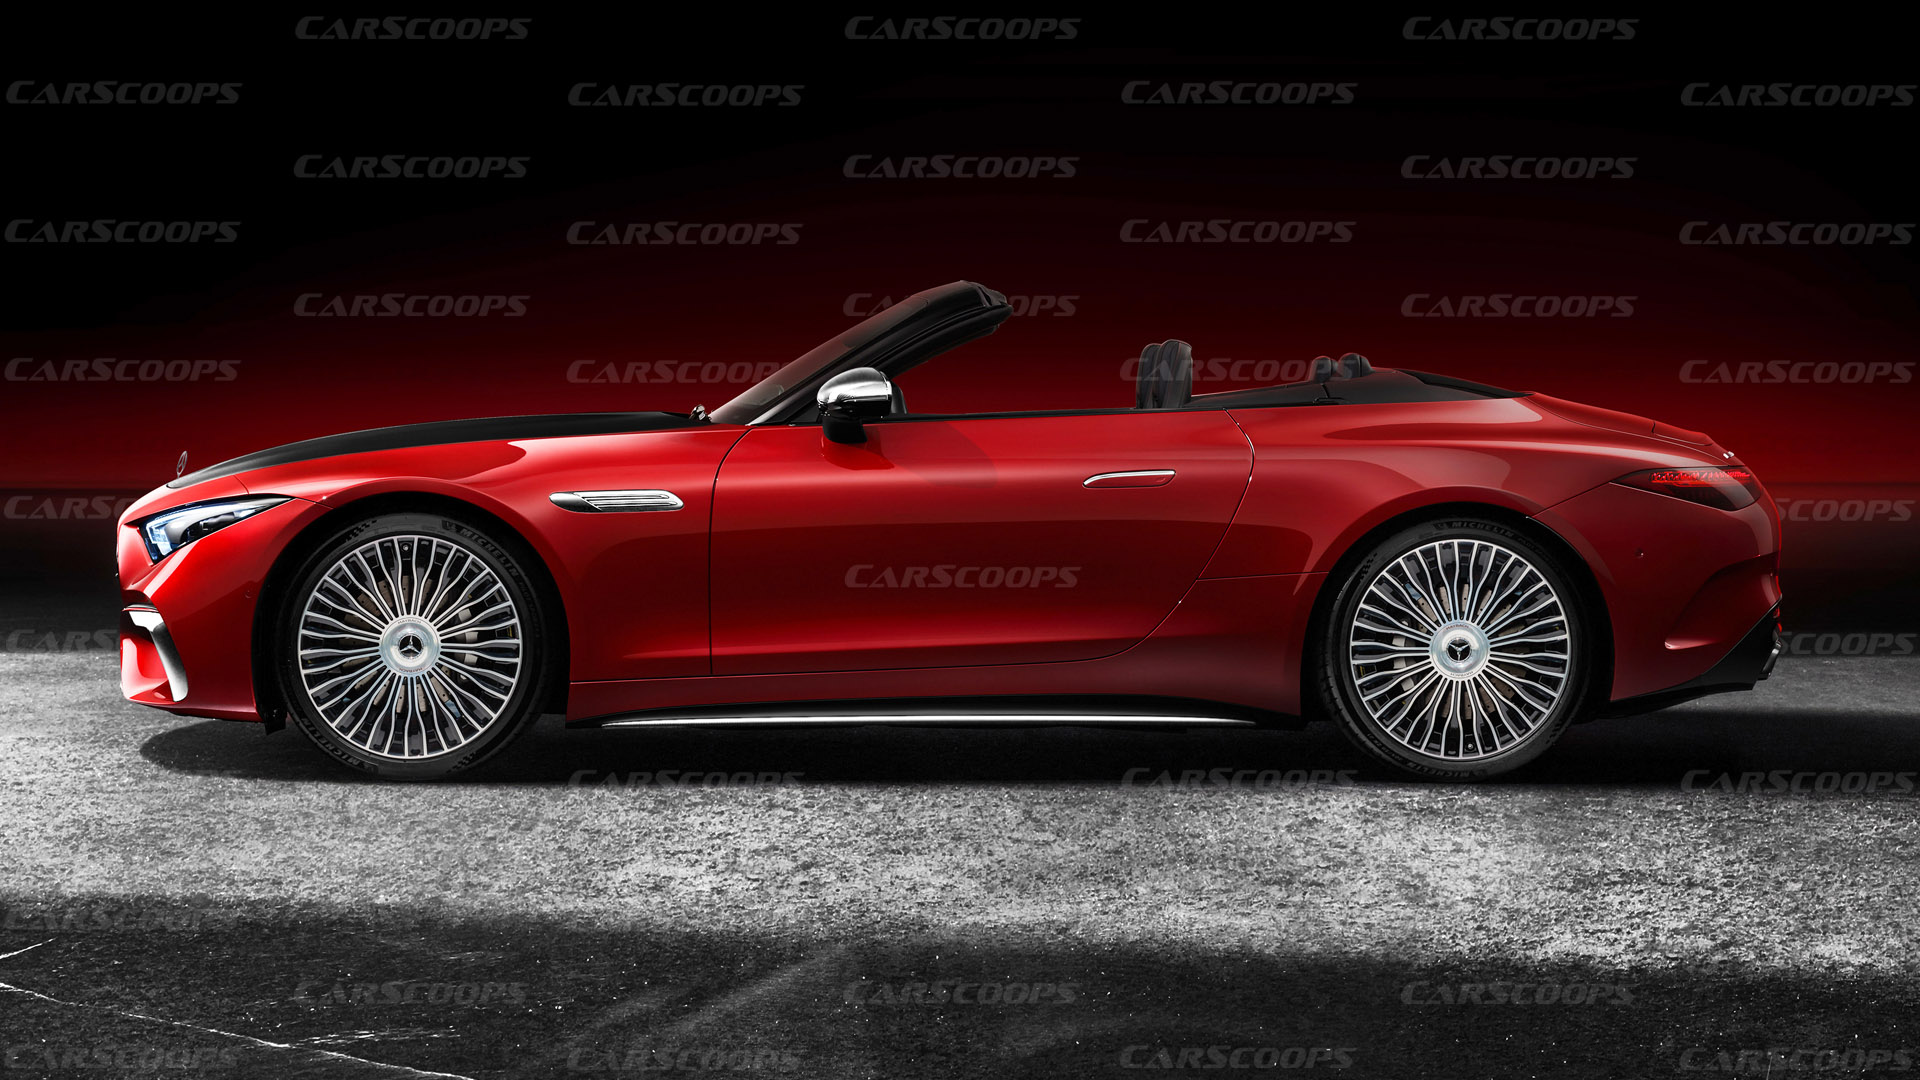 Mercedes-Maybach SL: Here's What To Expect From The Flagship